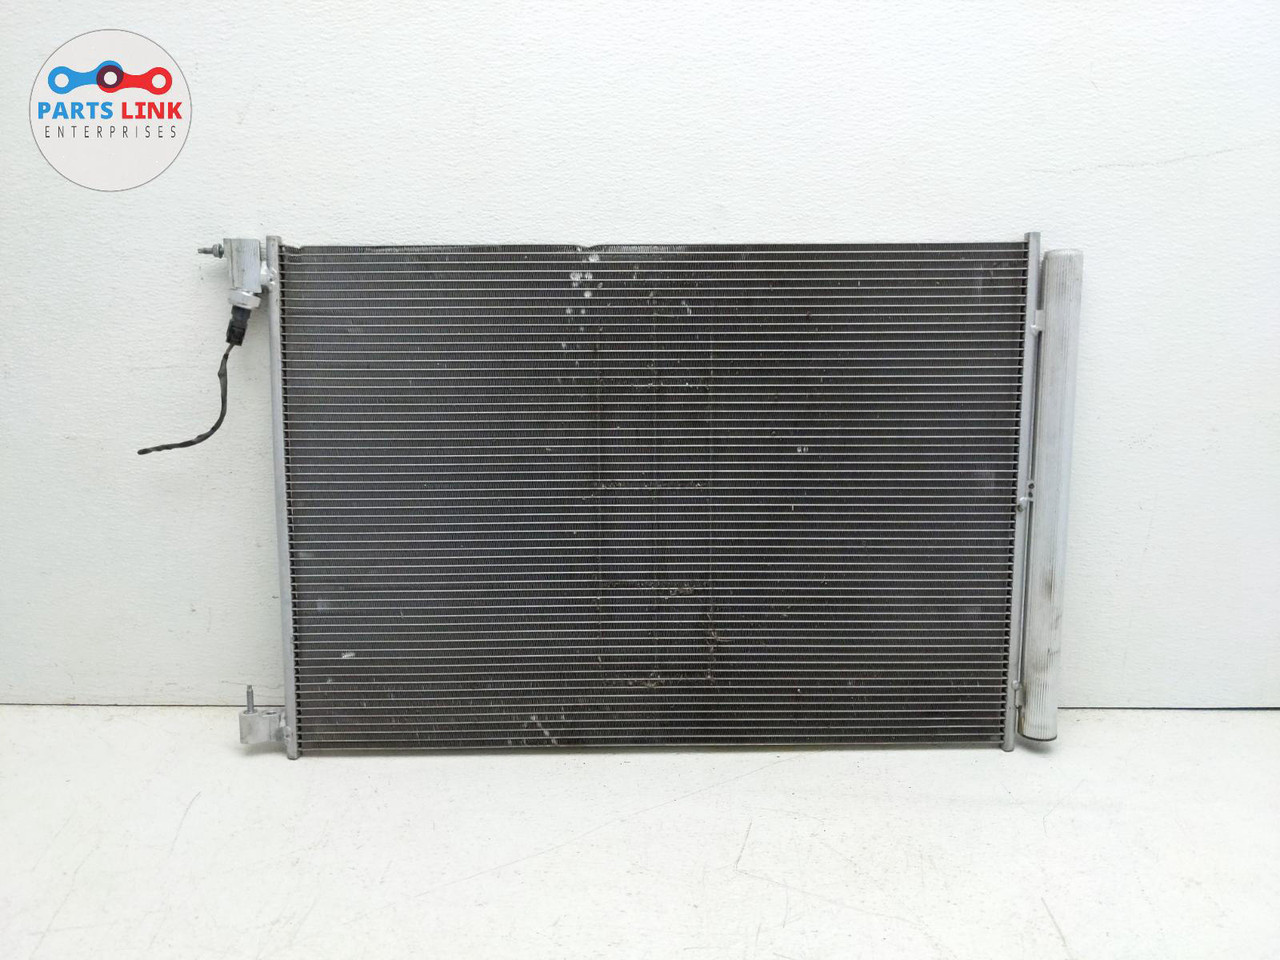 2015-2020 MERCEDES C63 S AMG W205 A/C AC CONDENCER CONDITIONER RADIATOR  ASSEMBLY - PARTS LINK ENT